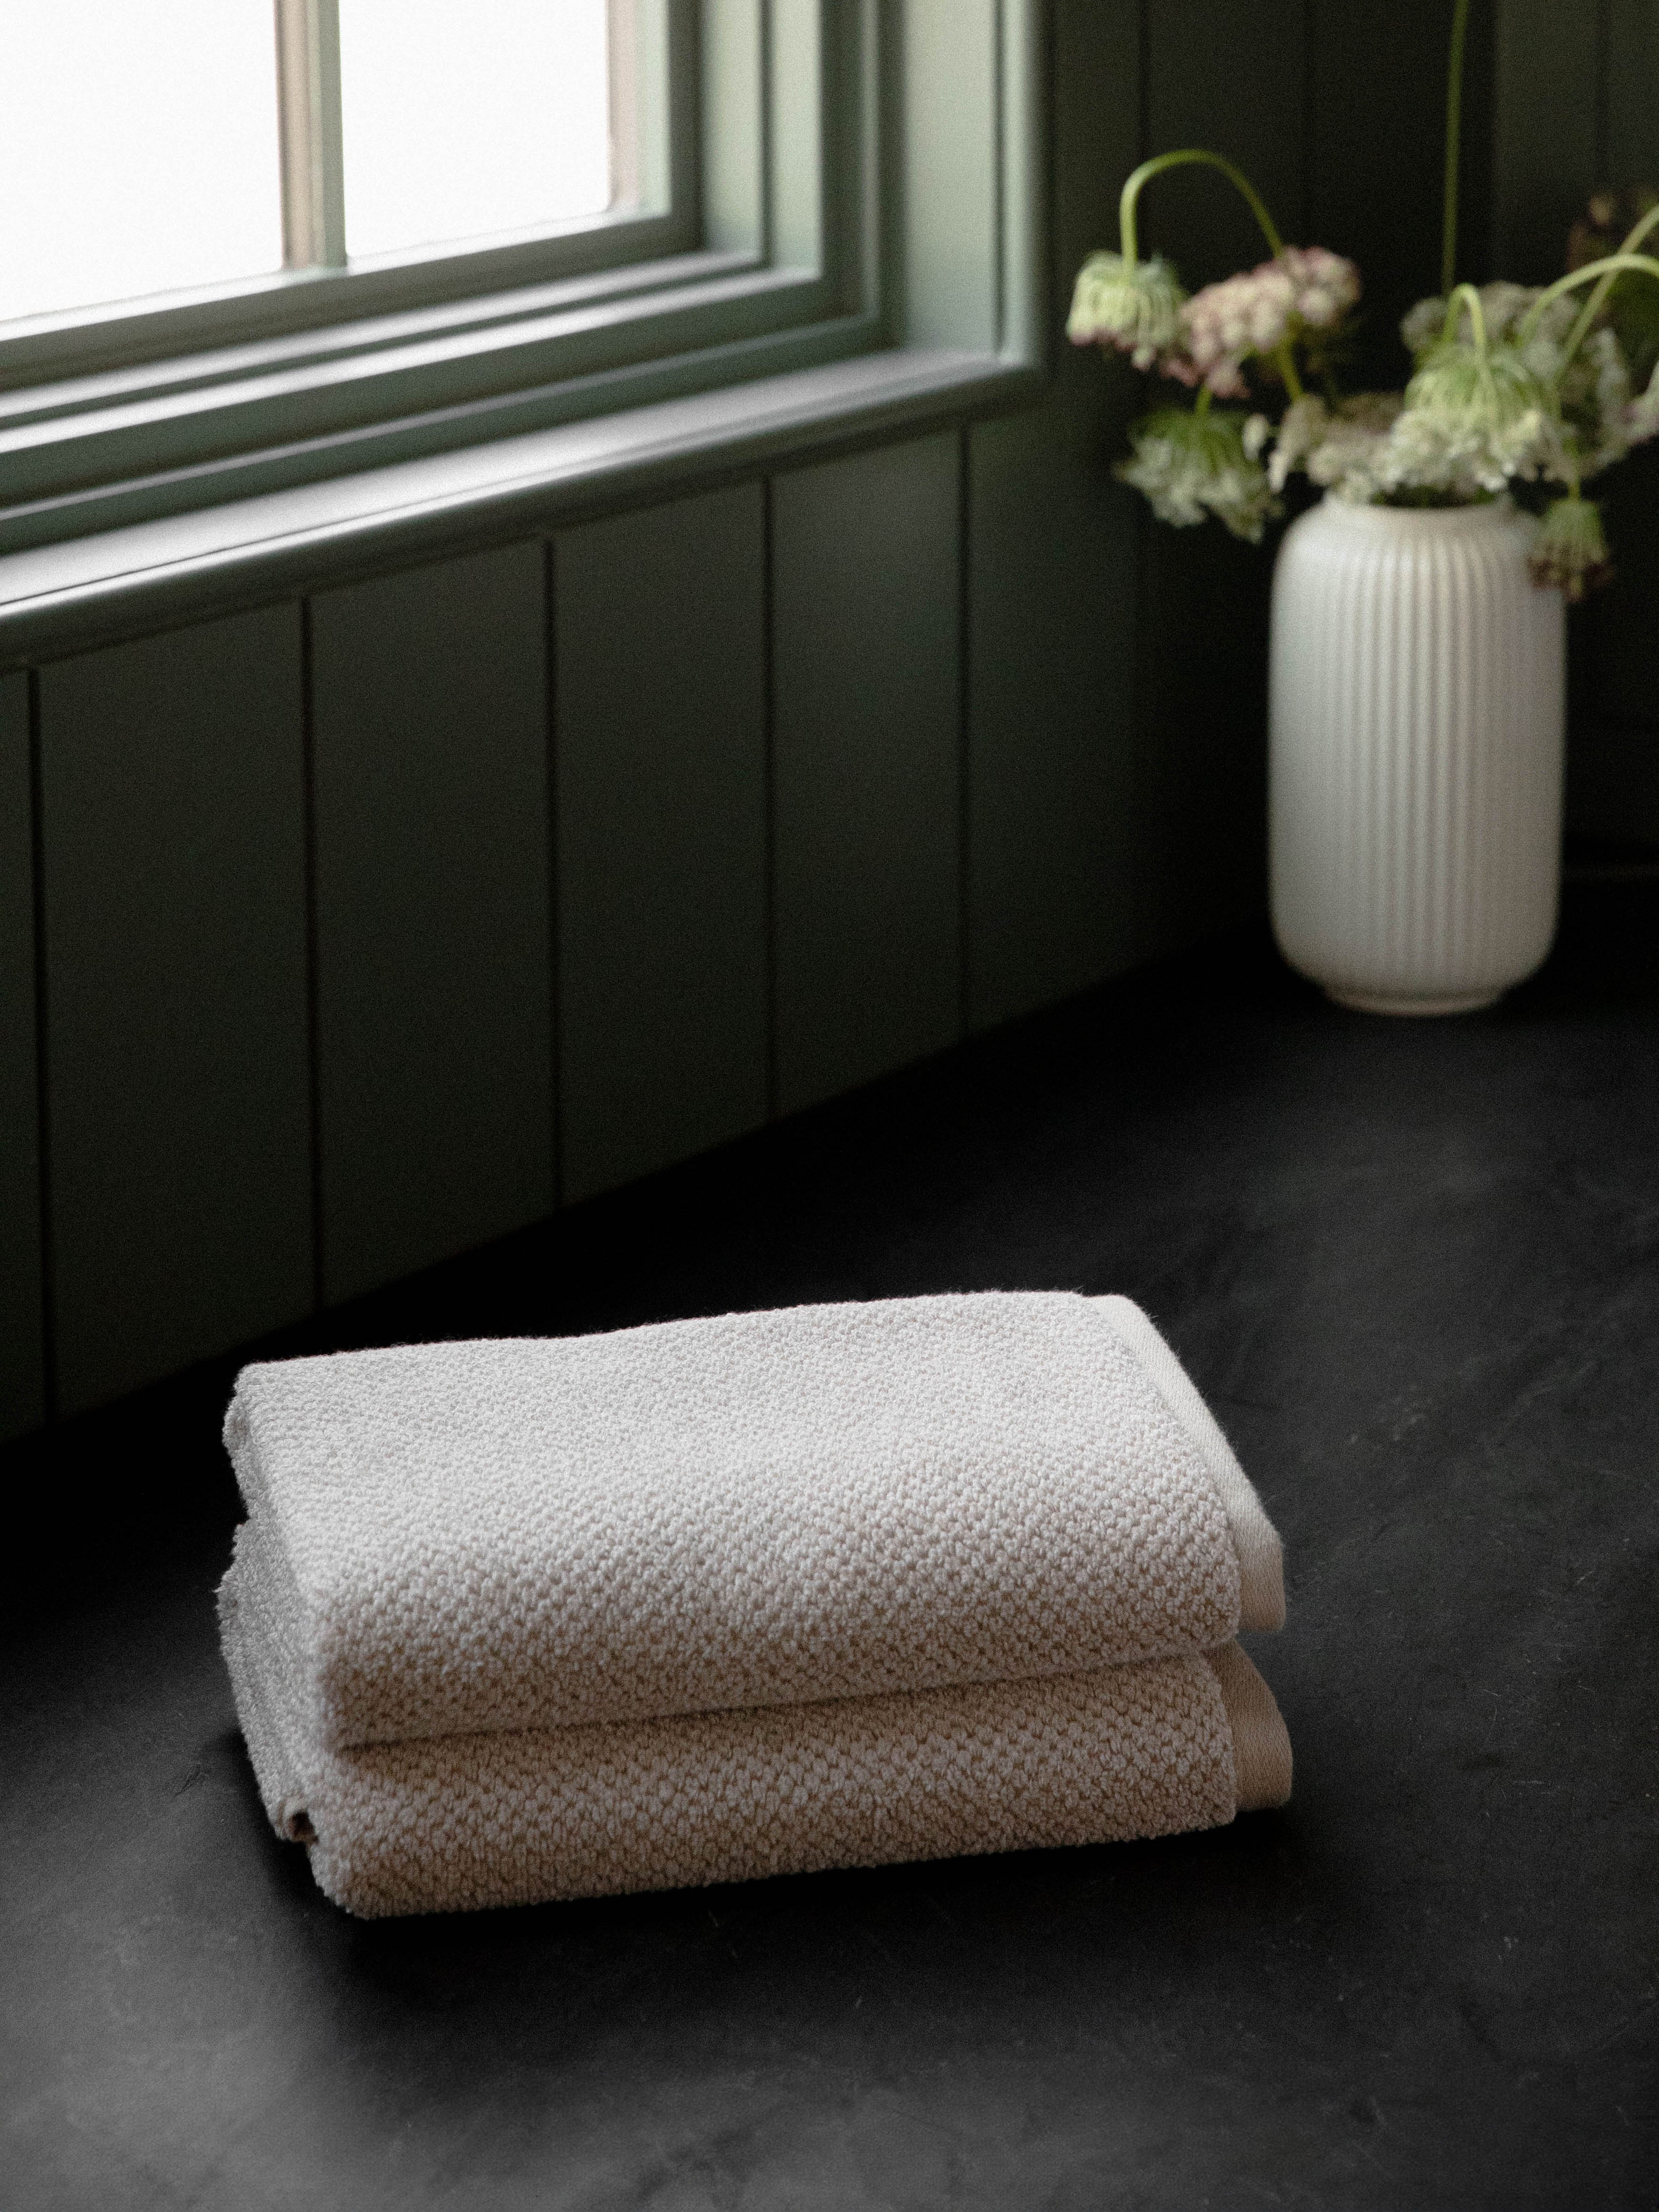 Nantucket Hand Towels in the color Heathered Sand. Photo of Nantucket Hand Towels taken with the Hand Towels resting on a countertop in a bathroom. |Color: Heathered Sand